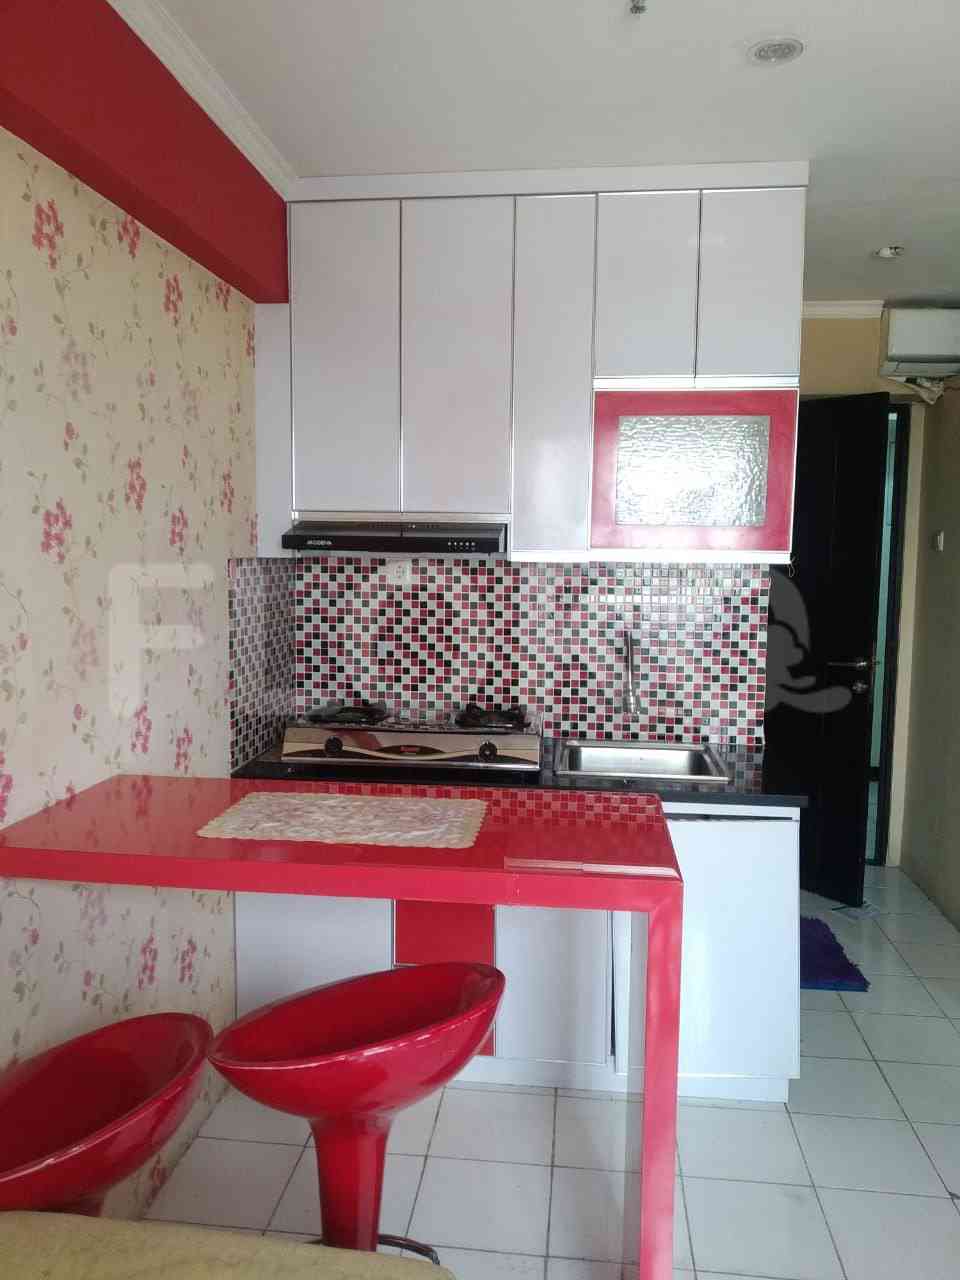 2 Bedroom on 18th Floor for Rent in Sentra Timur Residence - fca2d8 6